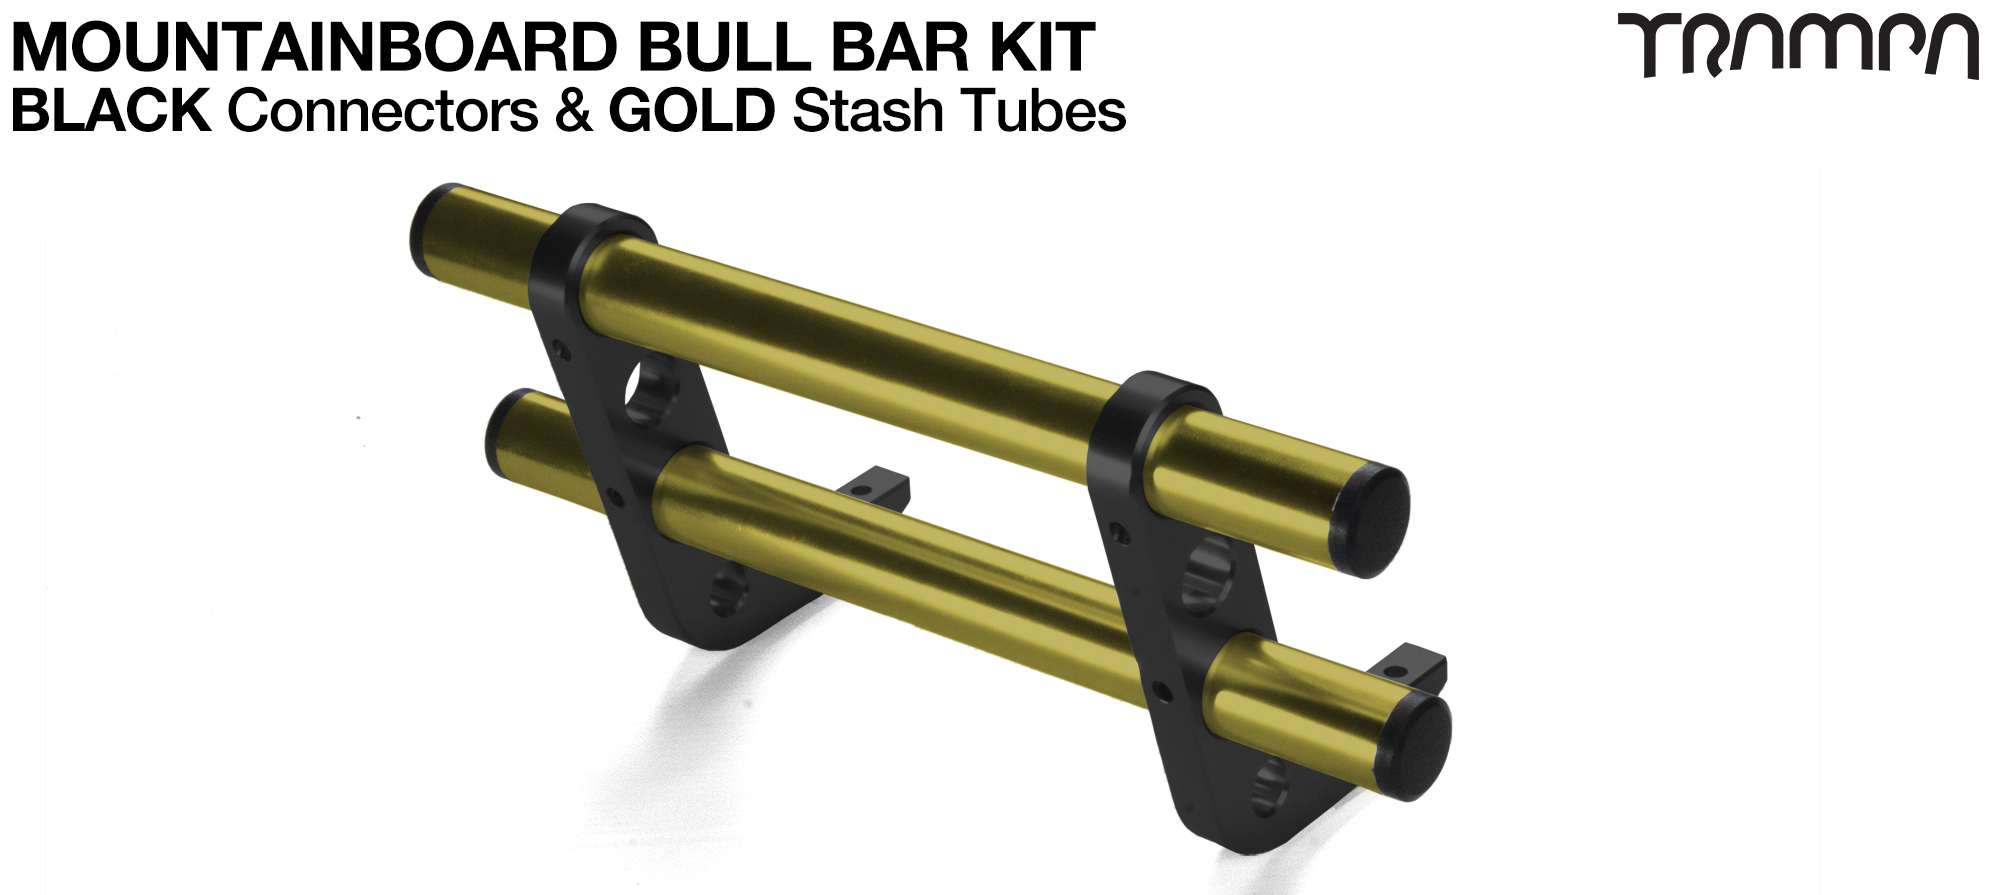 BLACK Uprights & GOLD Crossbar BULL BARS for MOUNTAINBOARDS using T6 Heat Treated CNC'd AluminIum Clamps, Hollow Aluminium Stash Tubes with Rubber end bungs 